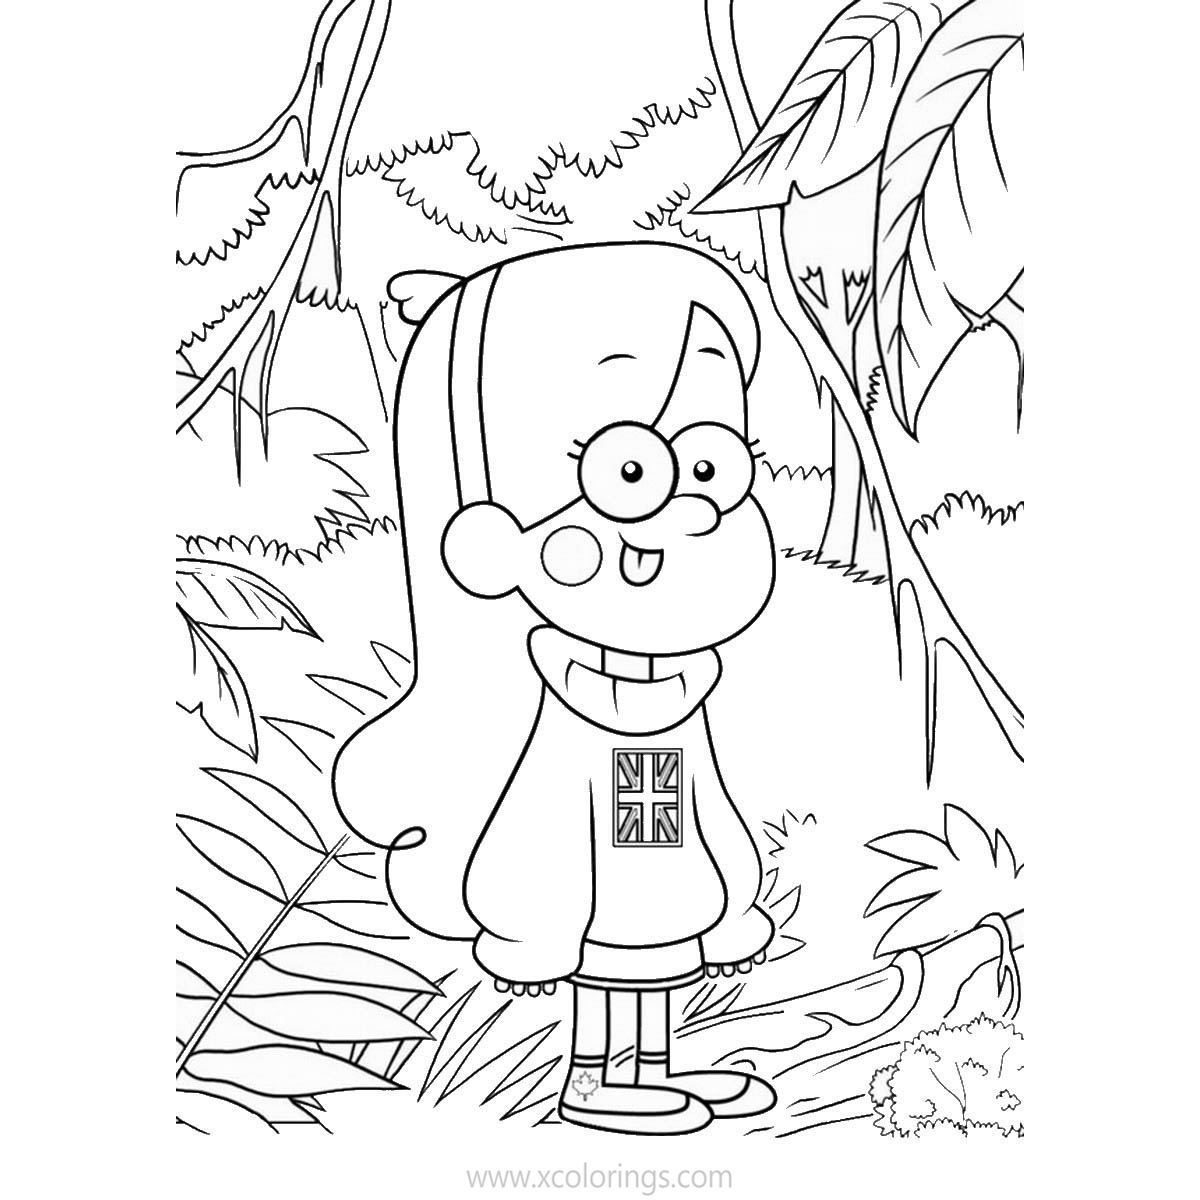 Free Gravity Falls Coloring Pages Mabel In The Forest printable